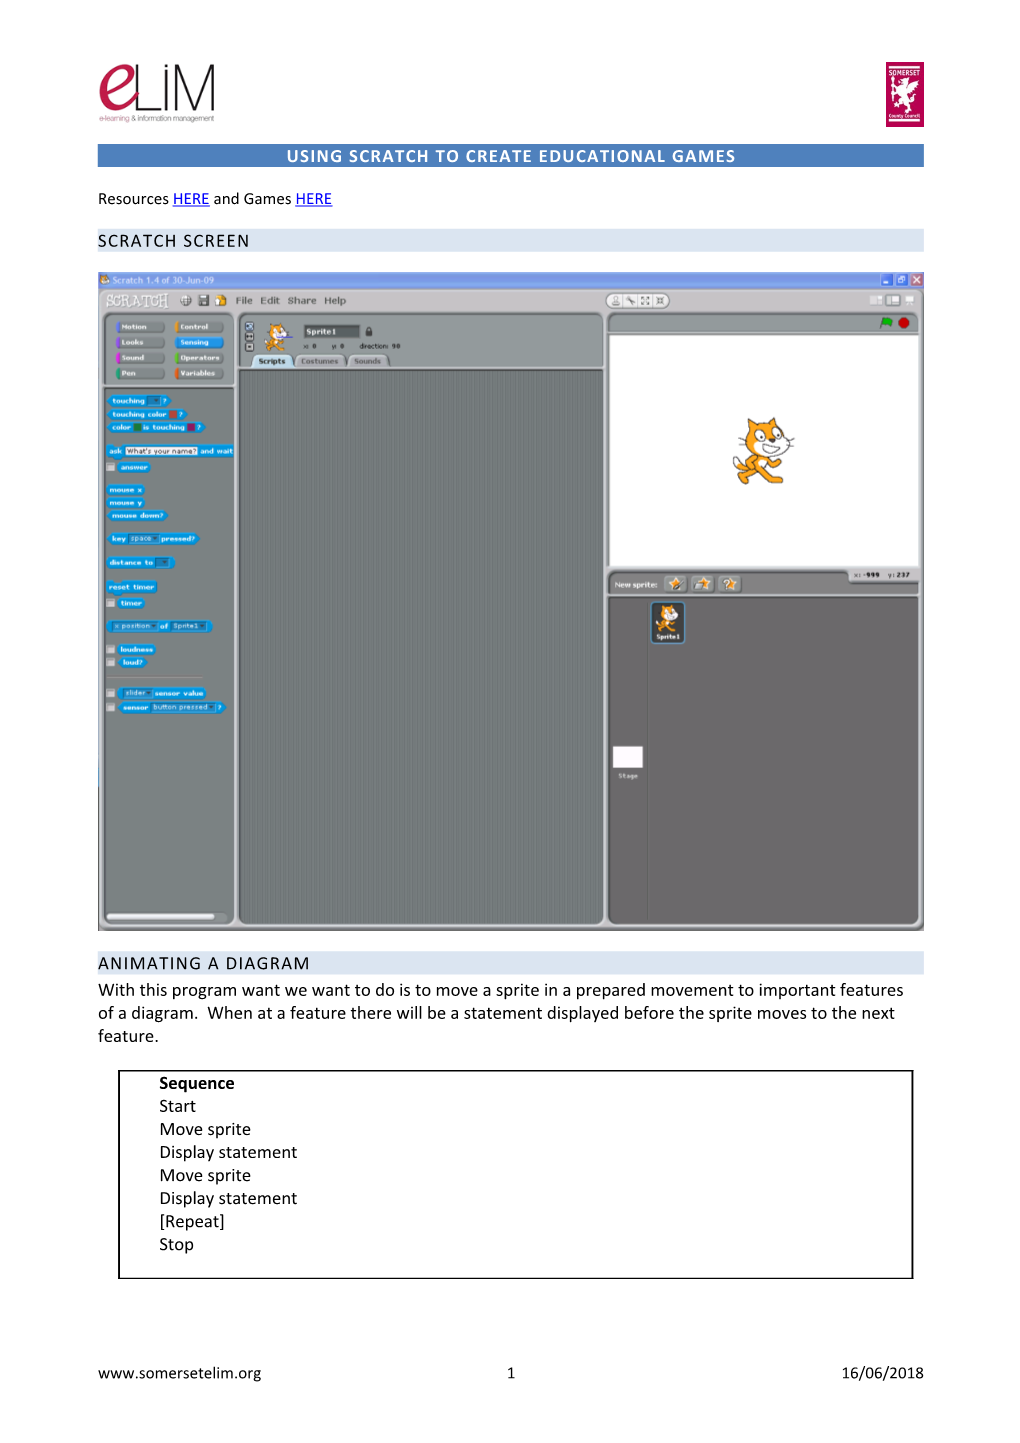 Using Scratch to Create Educational Games